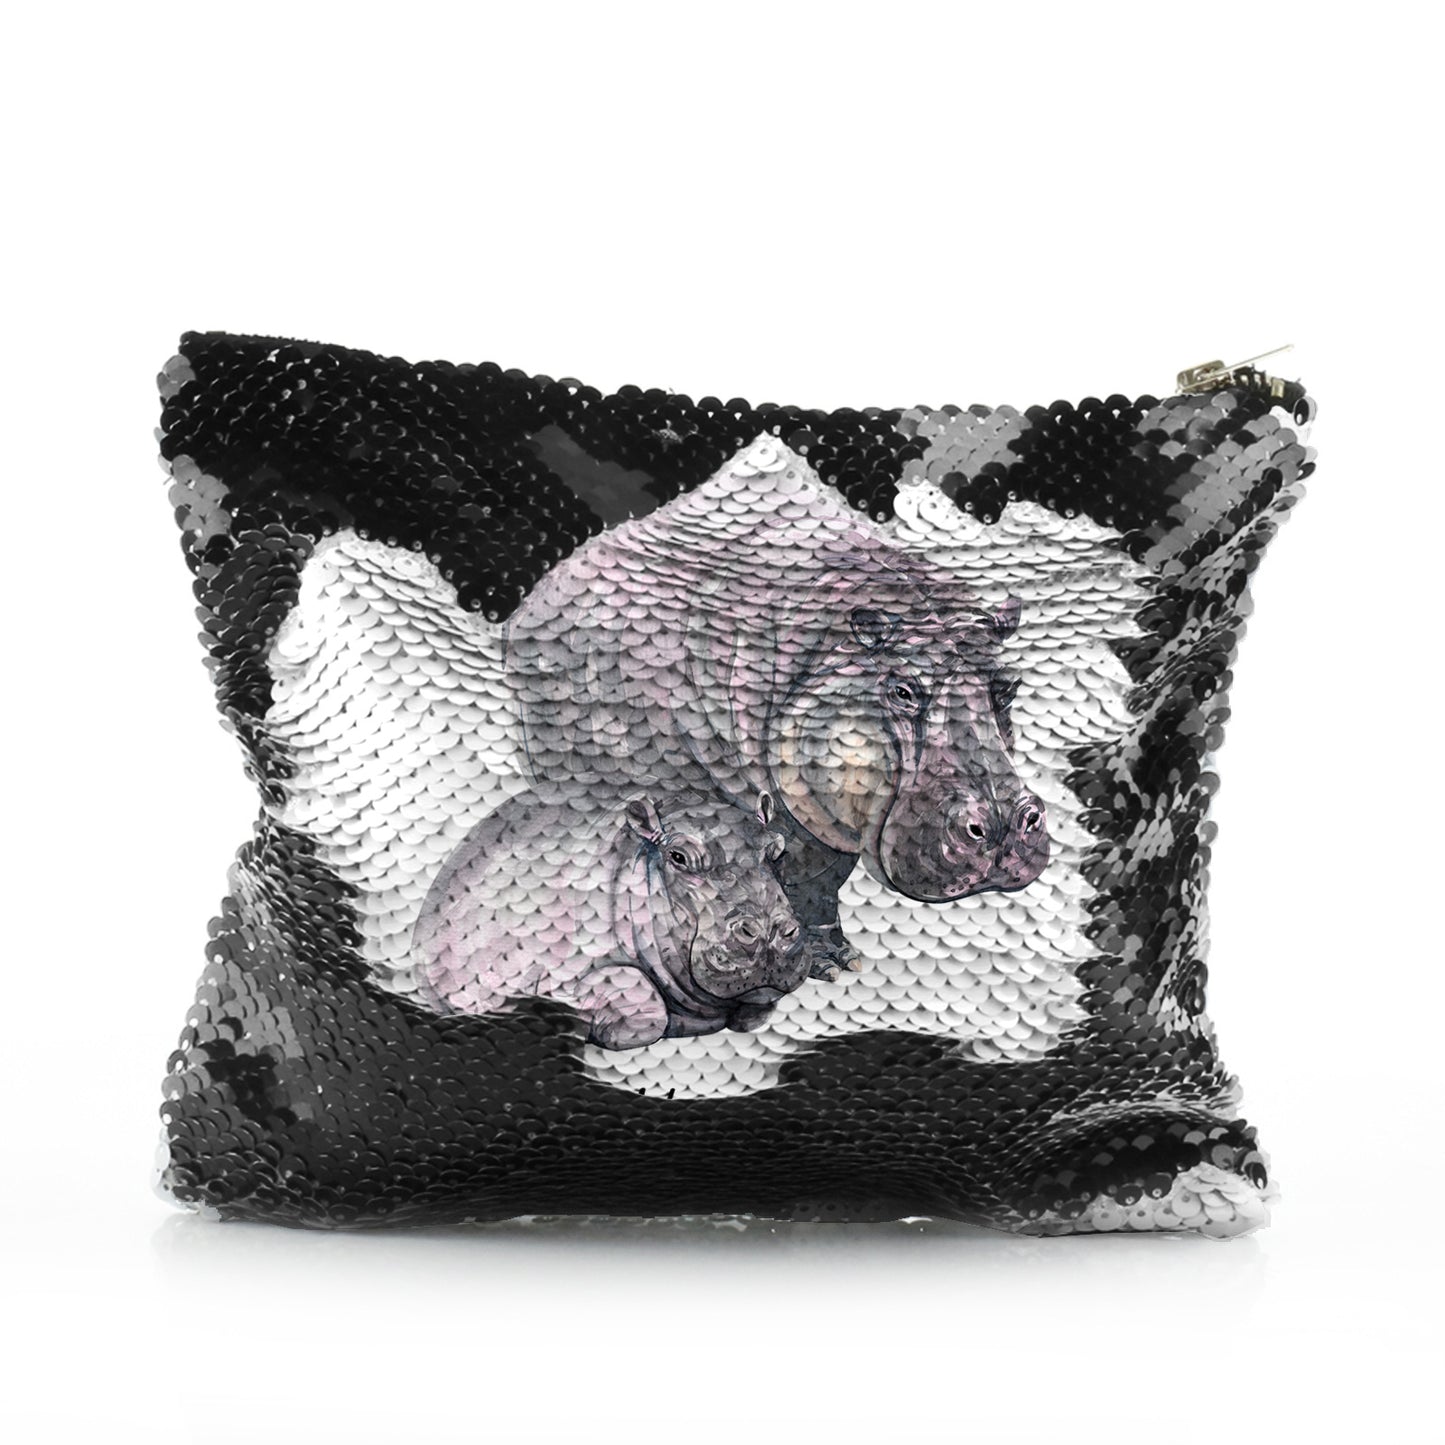 Personalised Sequin Zip Bag with Welcoming Text and Relaxing Mum and Baby Hippos